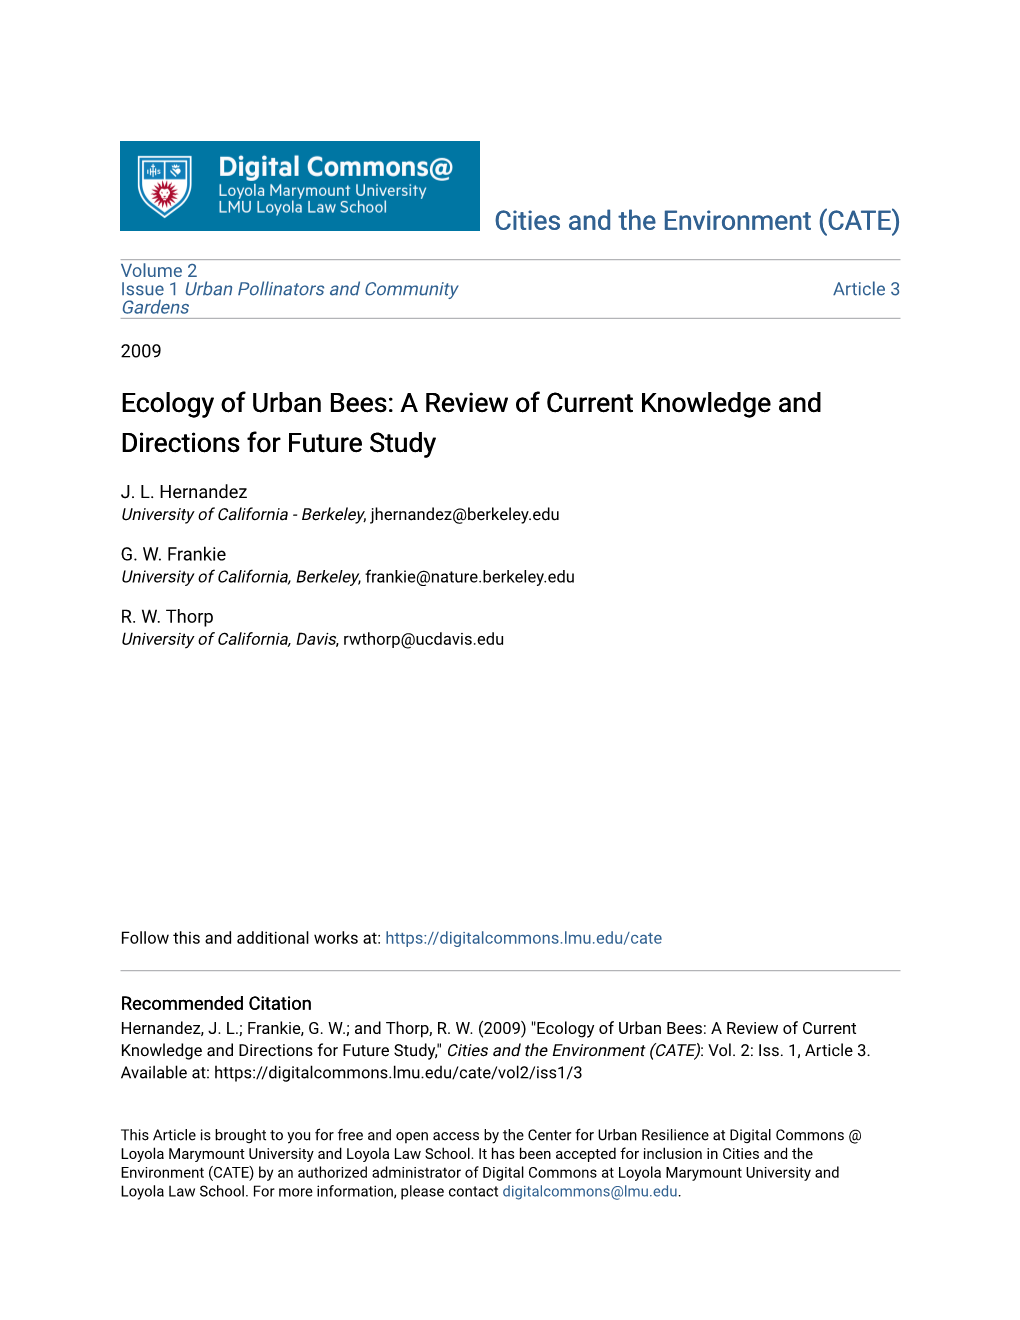 Ecology of Urban Bees: a Review of Current Knowledge and Directions for Future Study